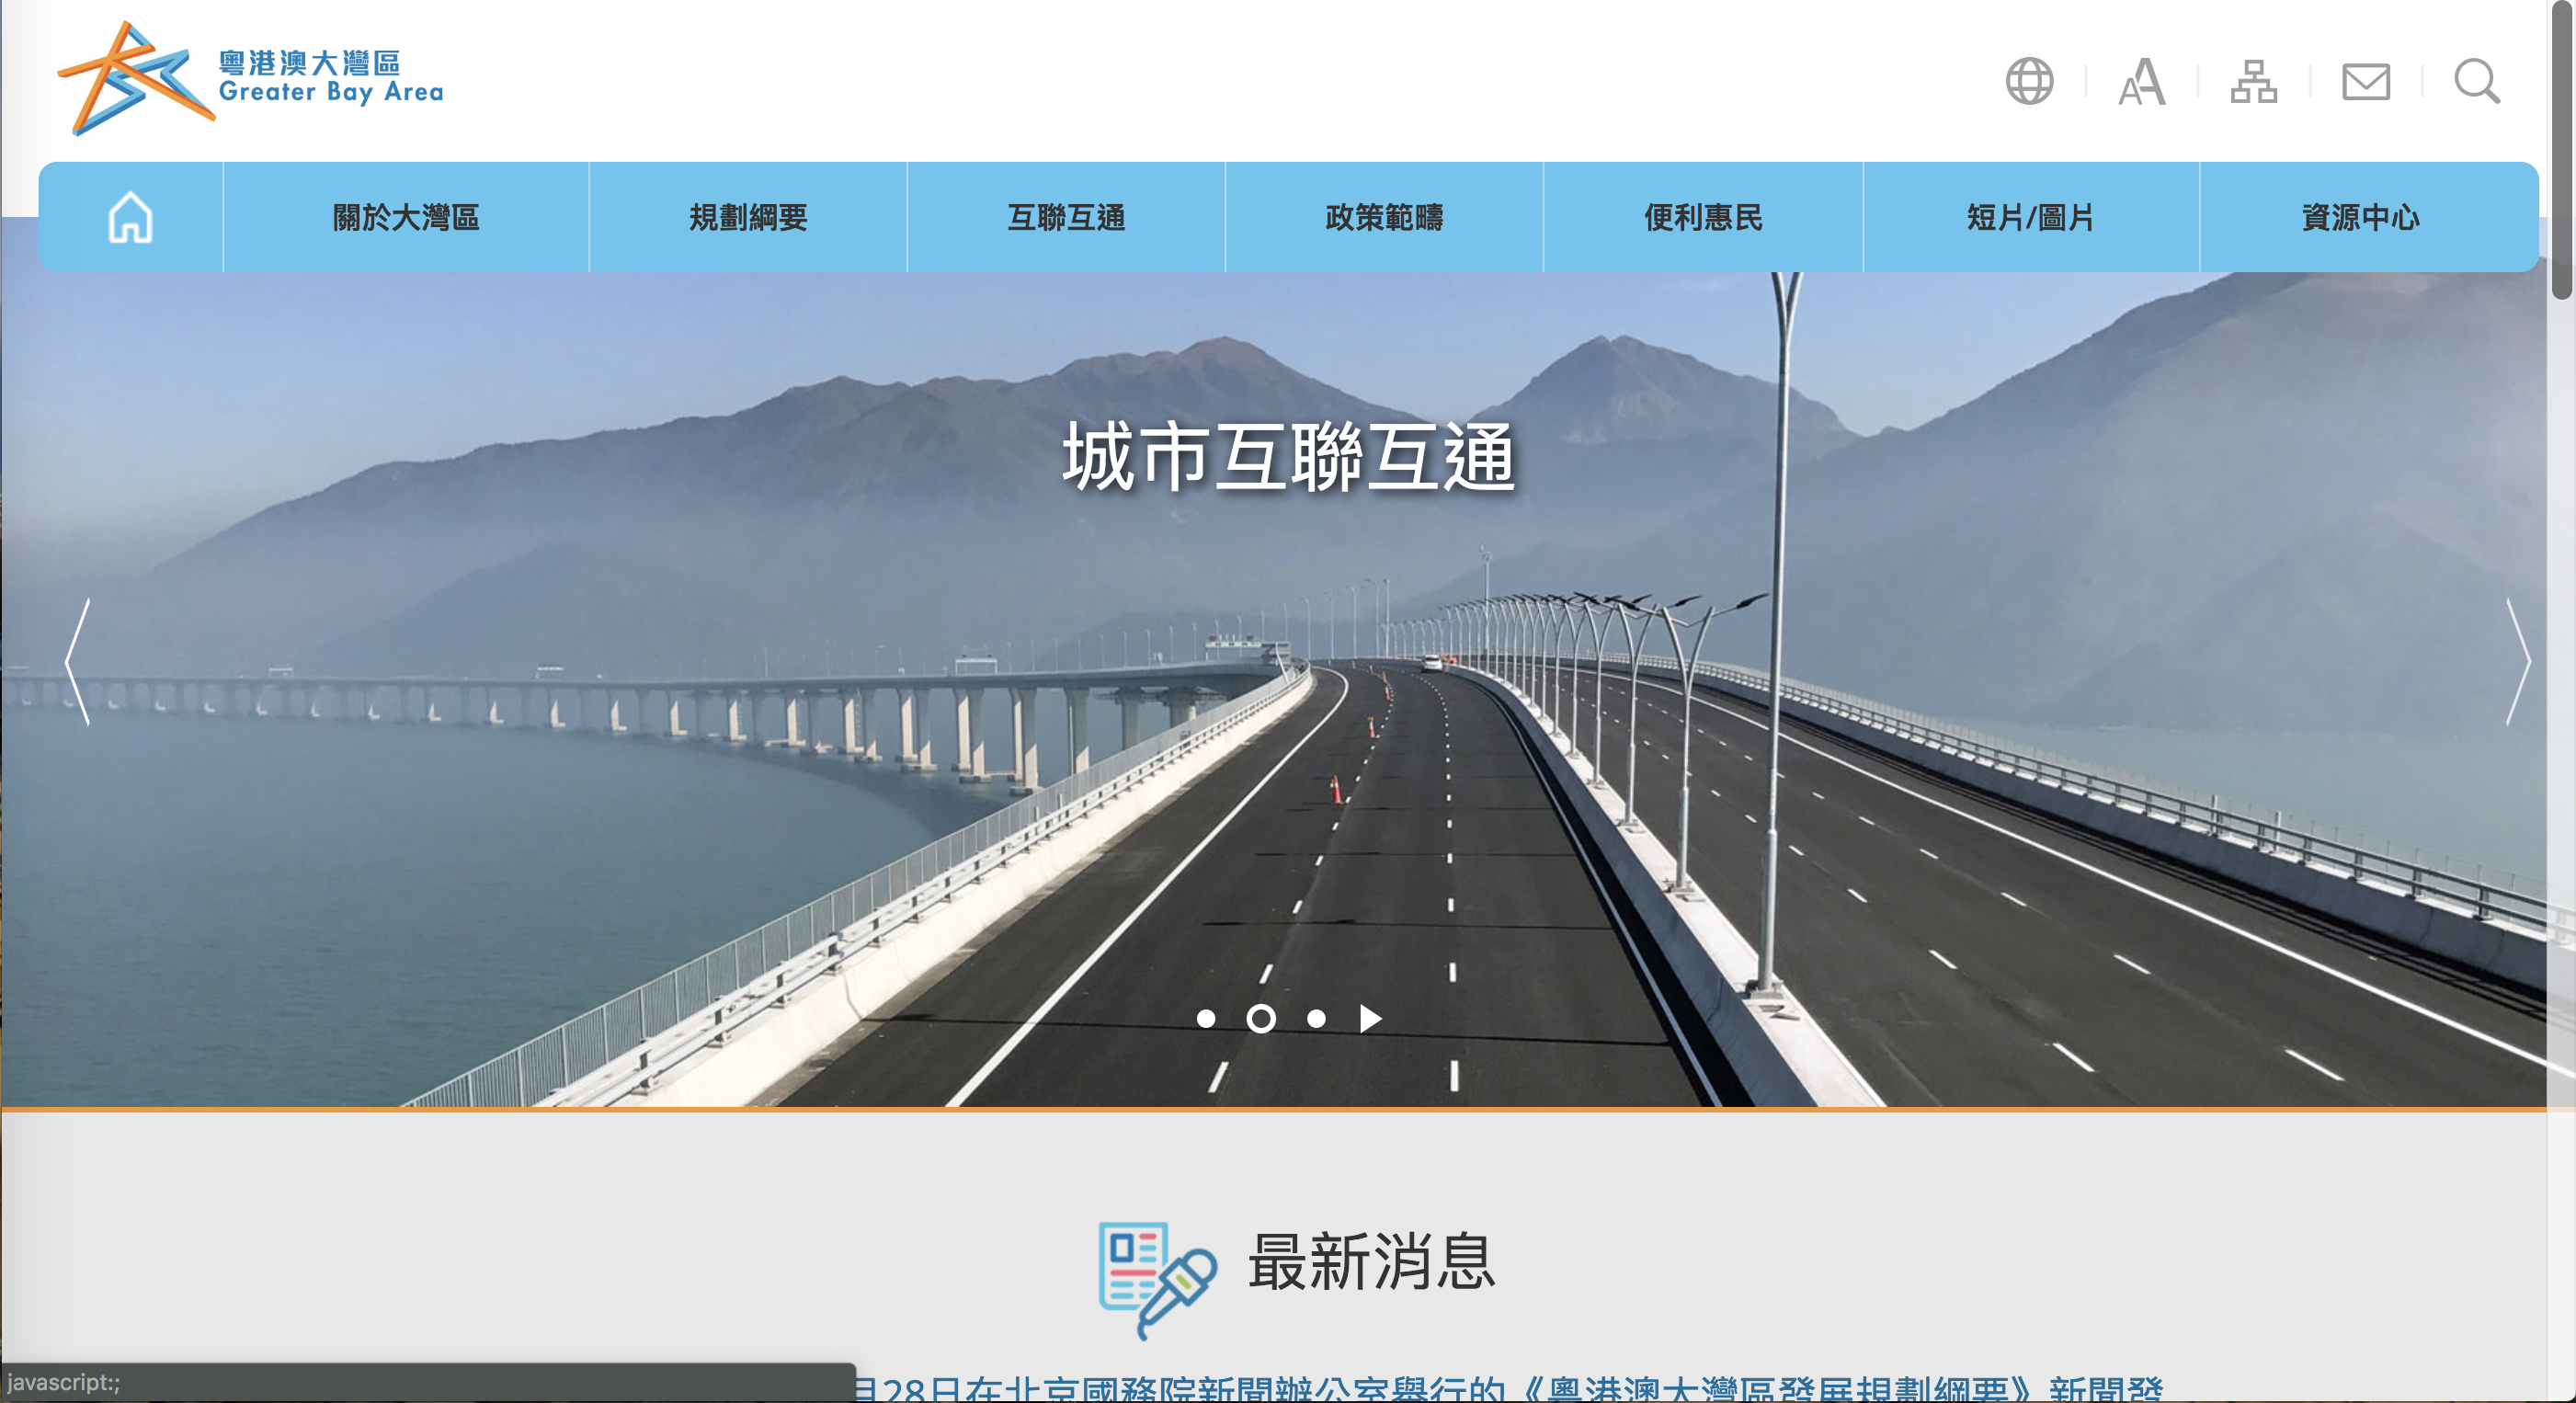 The image shows the homepage of the Greater Bay Area website, where the slogan "城市互聯互通" meaning connectivity between cities is shown.